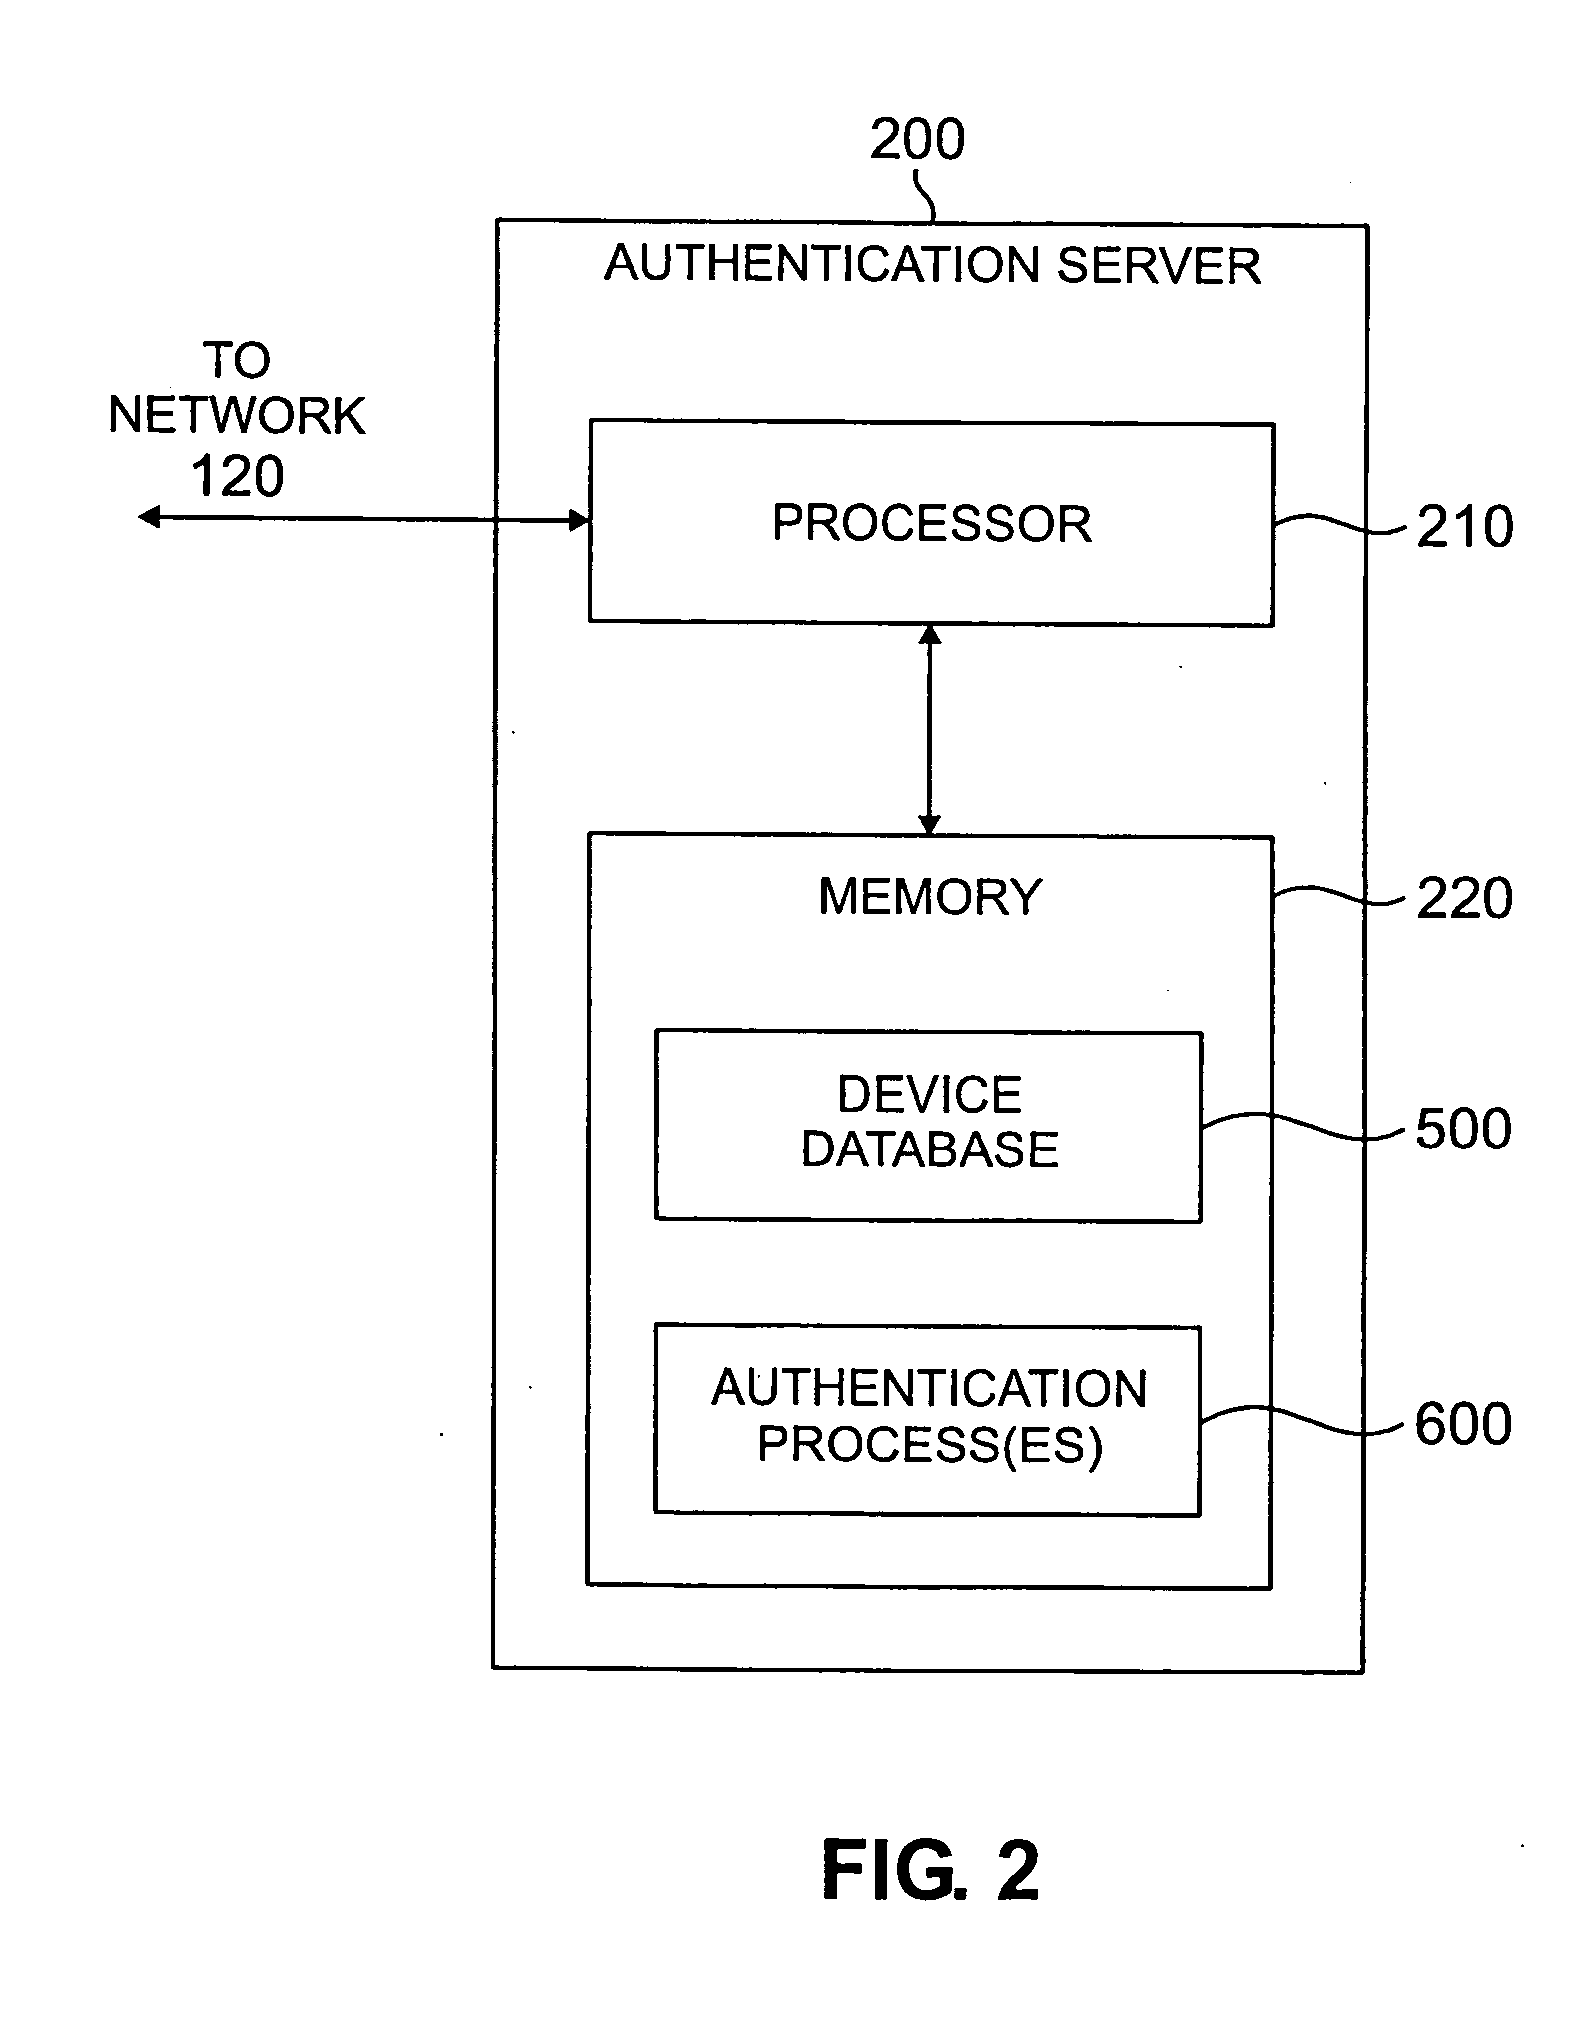 Method and apparatus for network security based on device security status